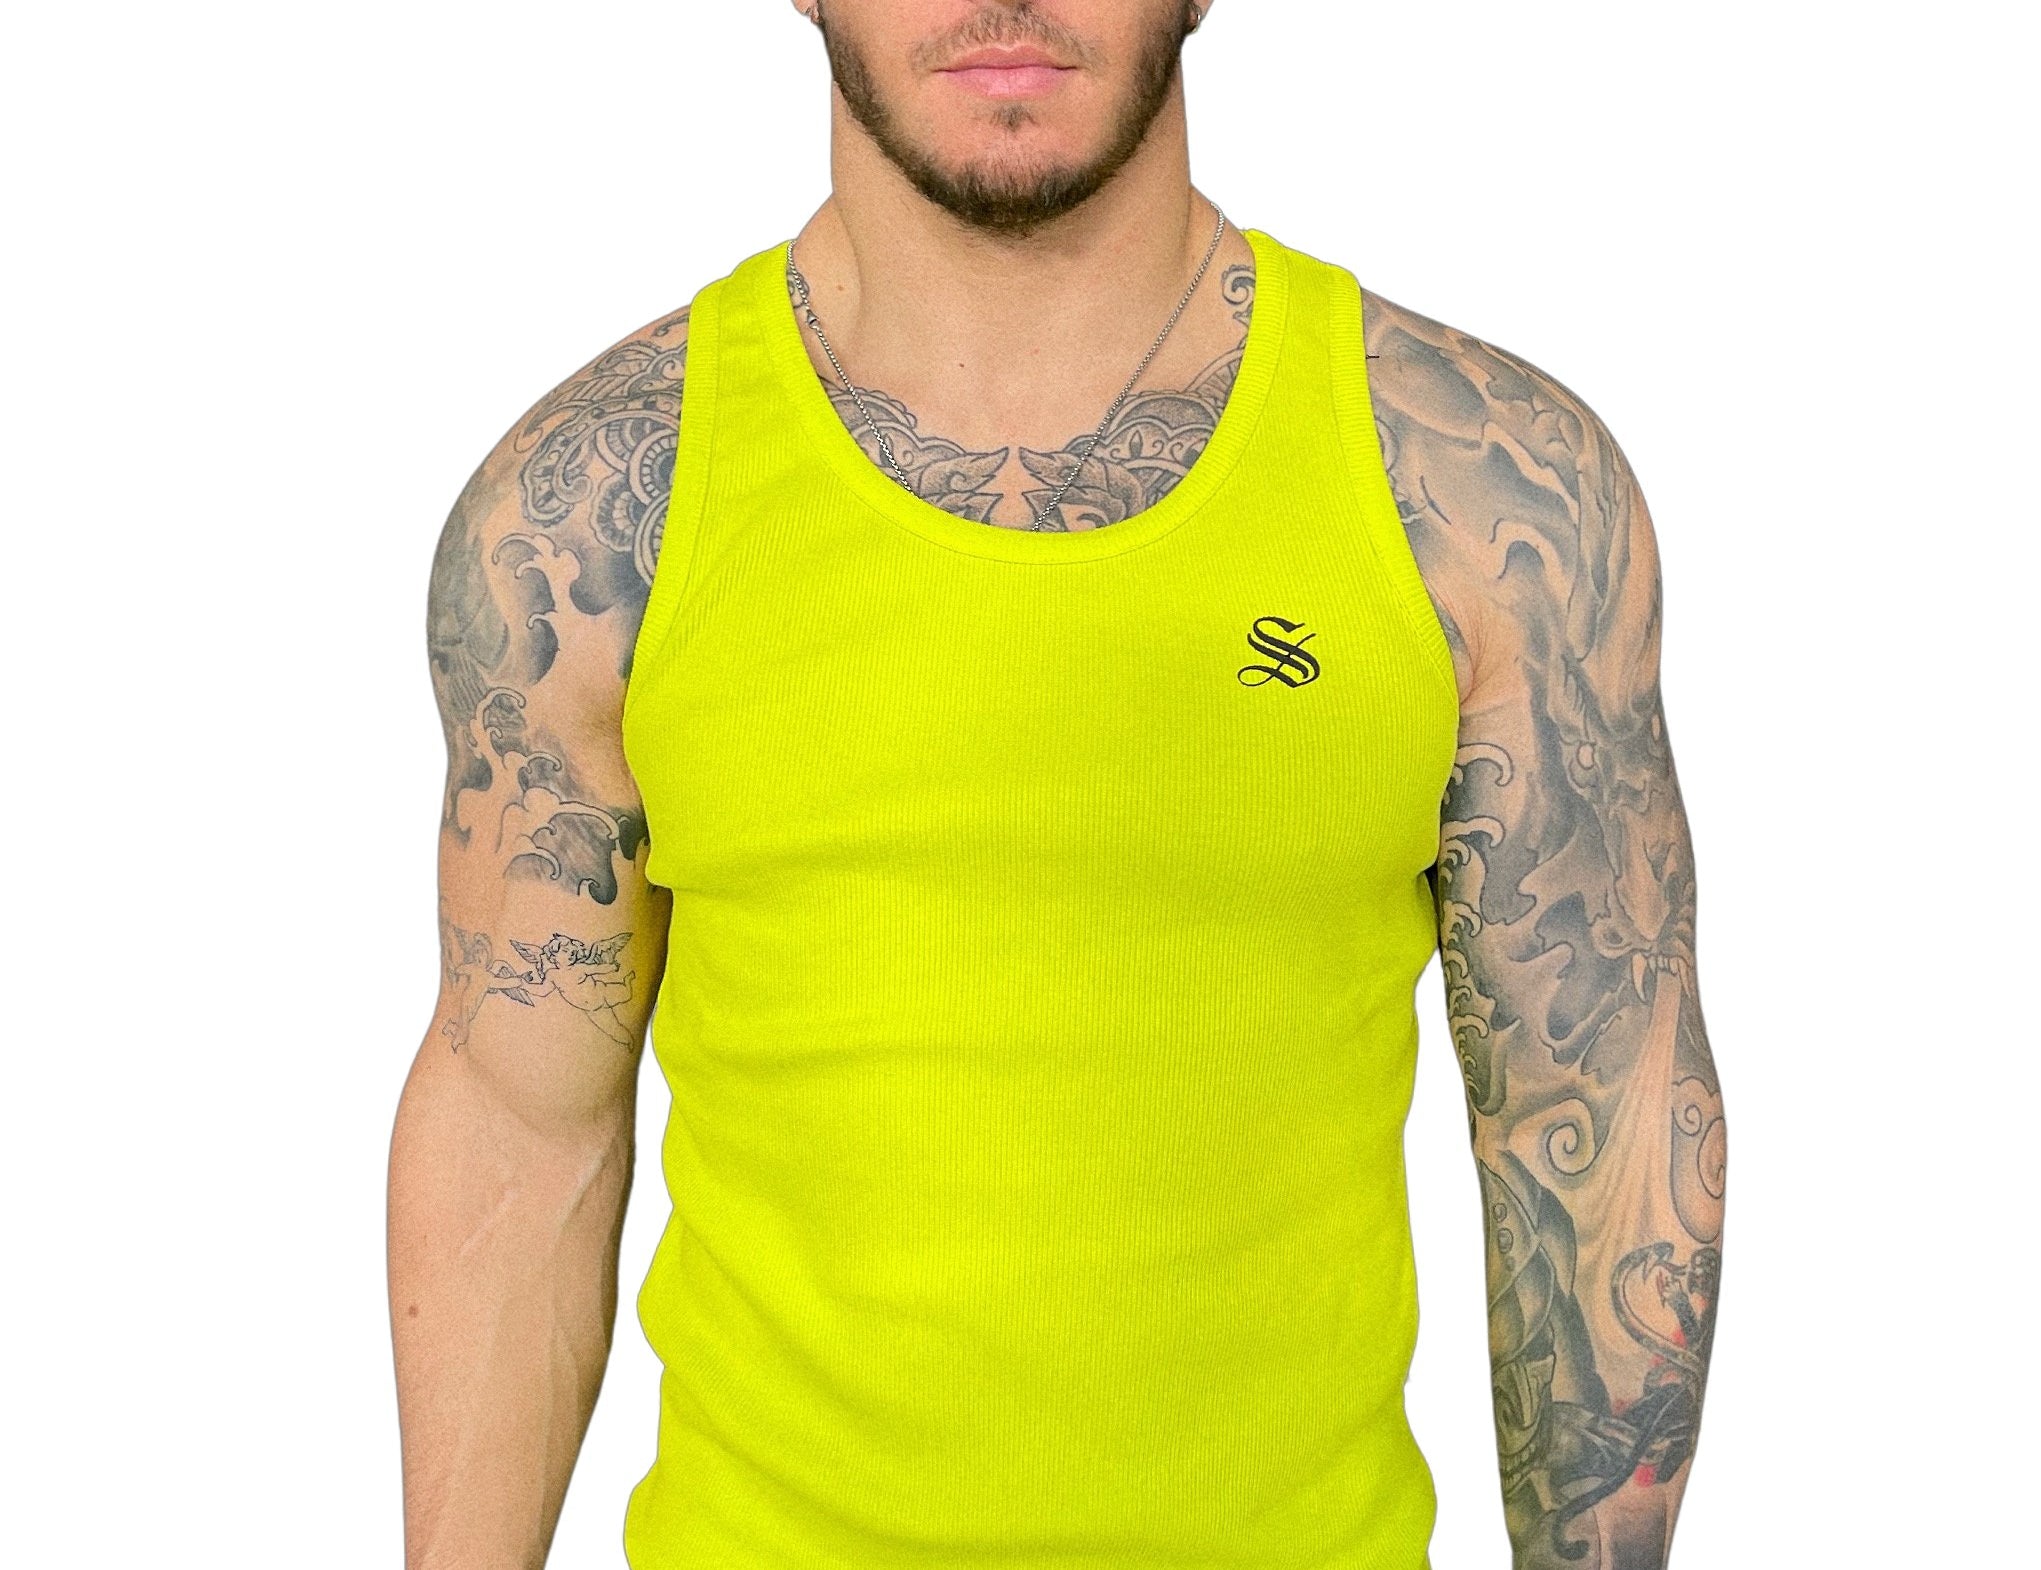 Sariel - Yellow Tank Top for Men - Sarman Fashion - Wholesale Clothing Fashion Brand for Men from Canada